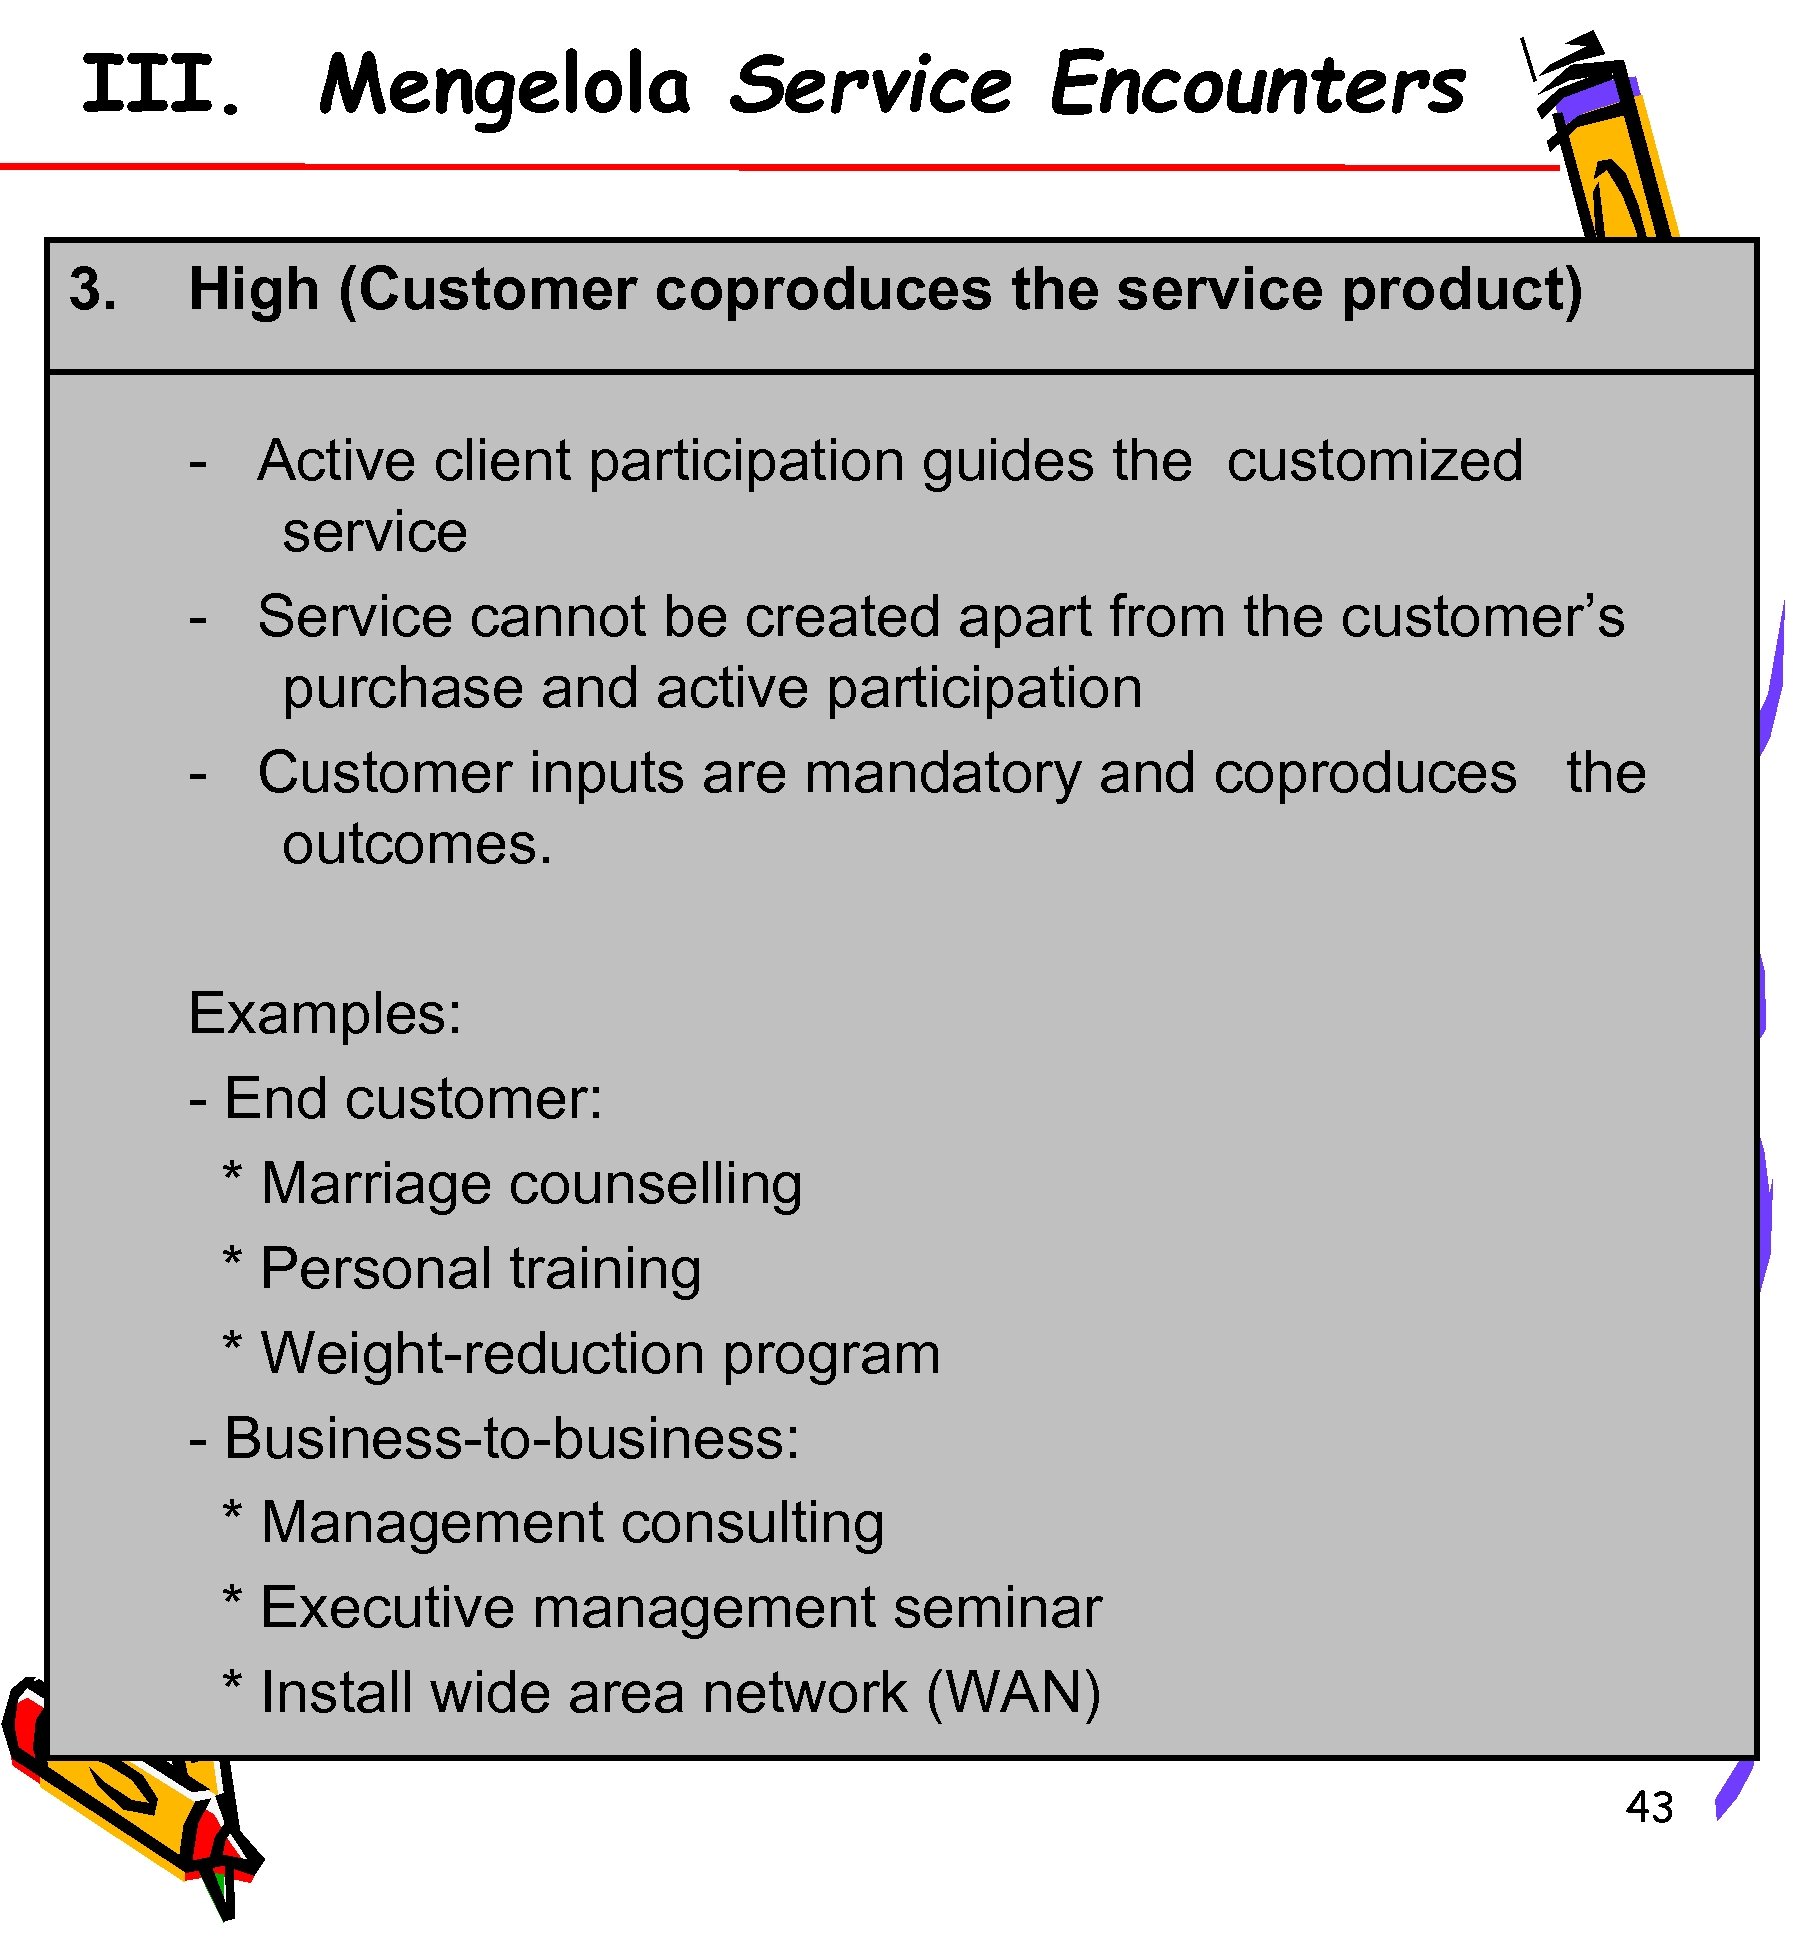 III. Mengelola Service Encounters 3. High (Customer coproduces the service product) - Active client